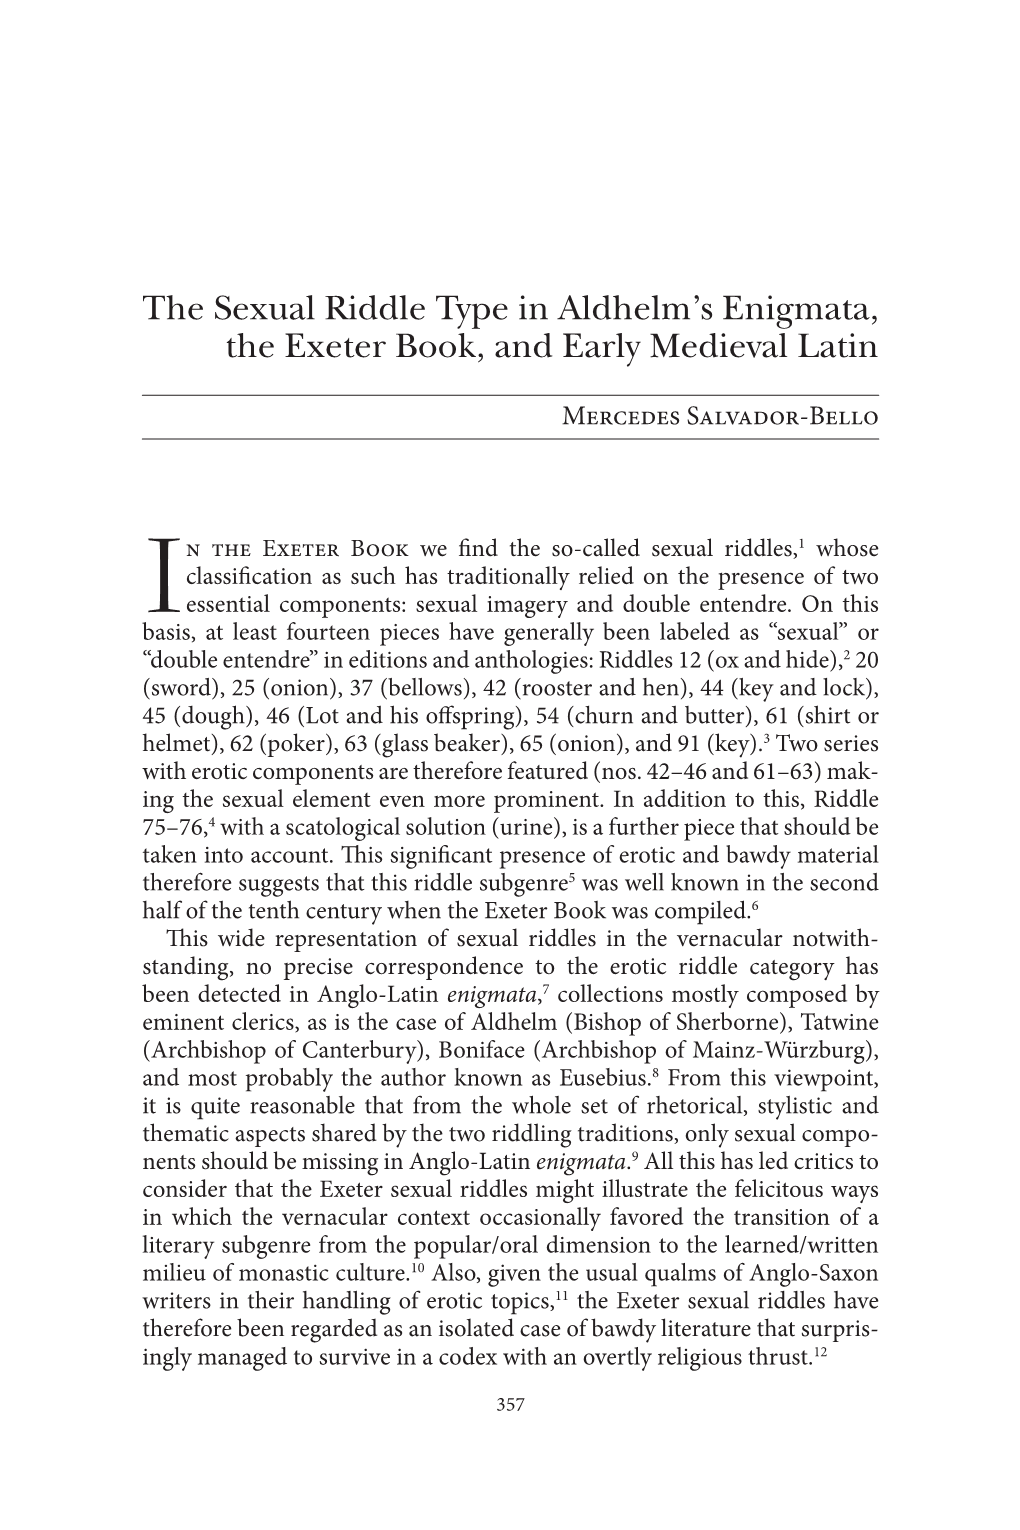 The Sexual Riddle Type in Aldhelm's Enigmata, the Exeter Book, And